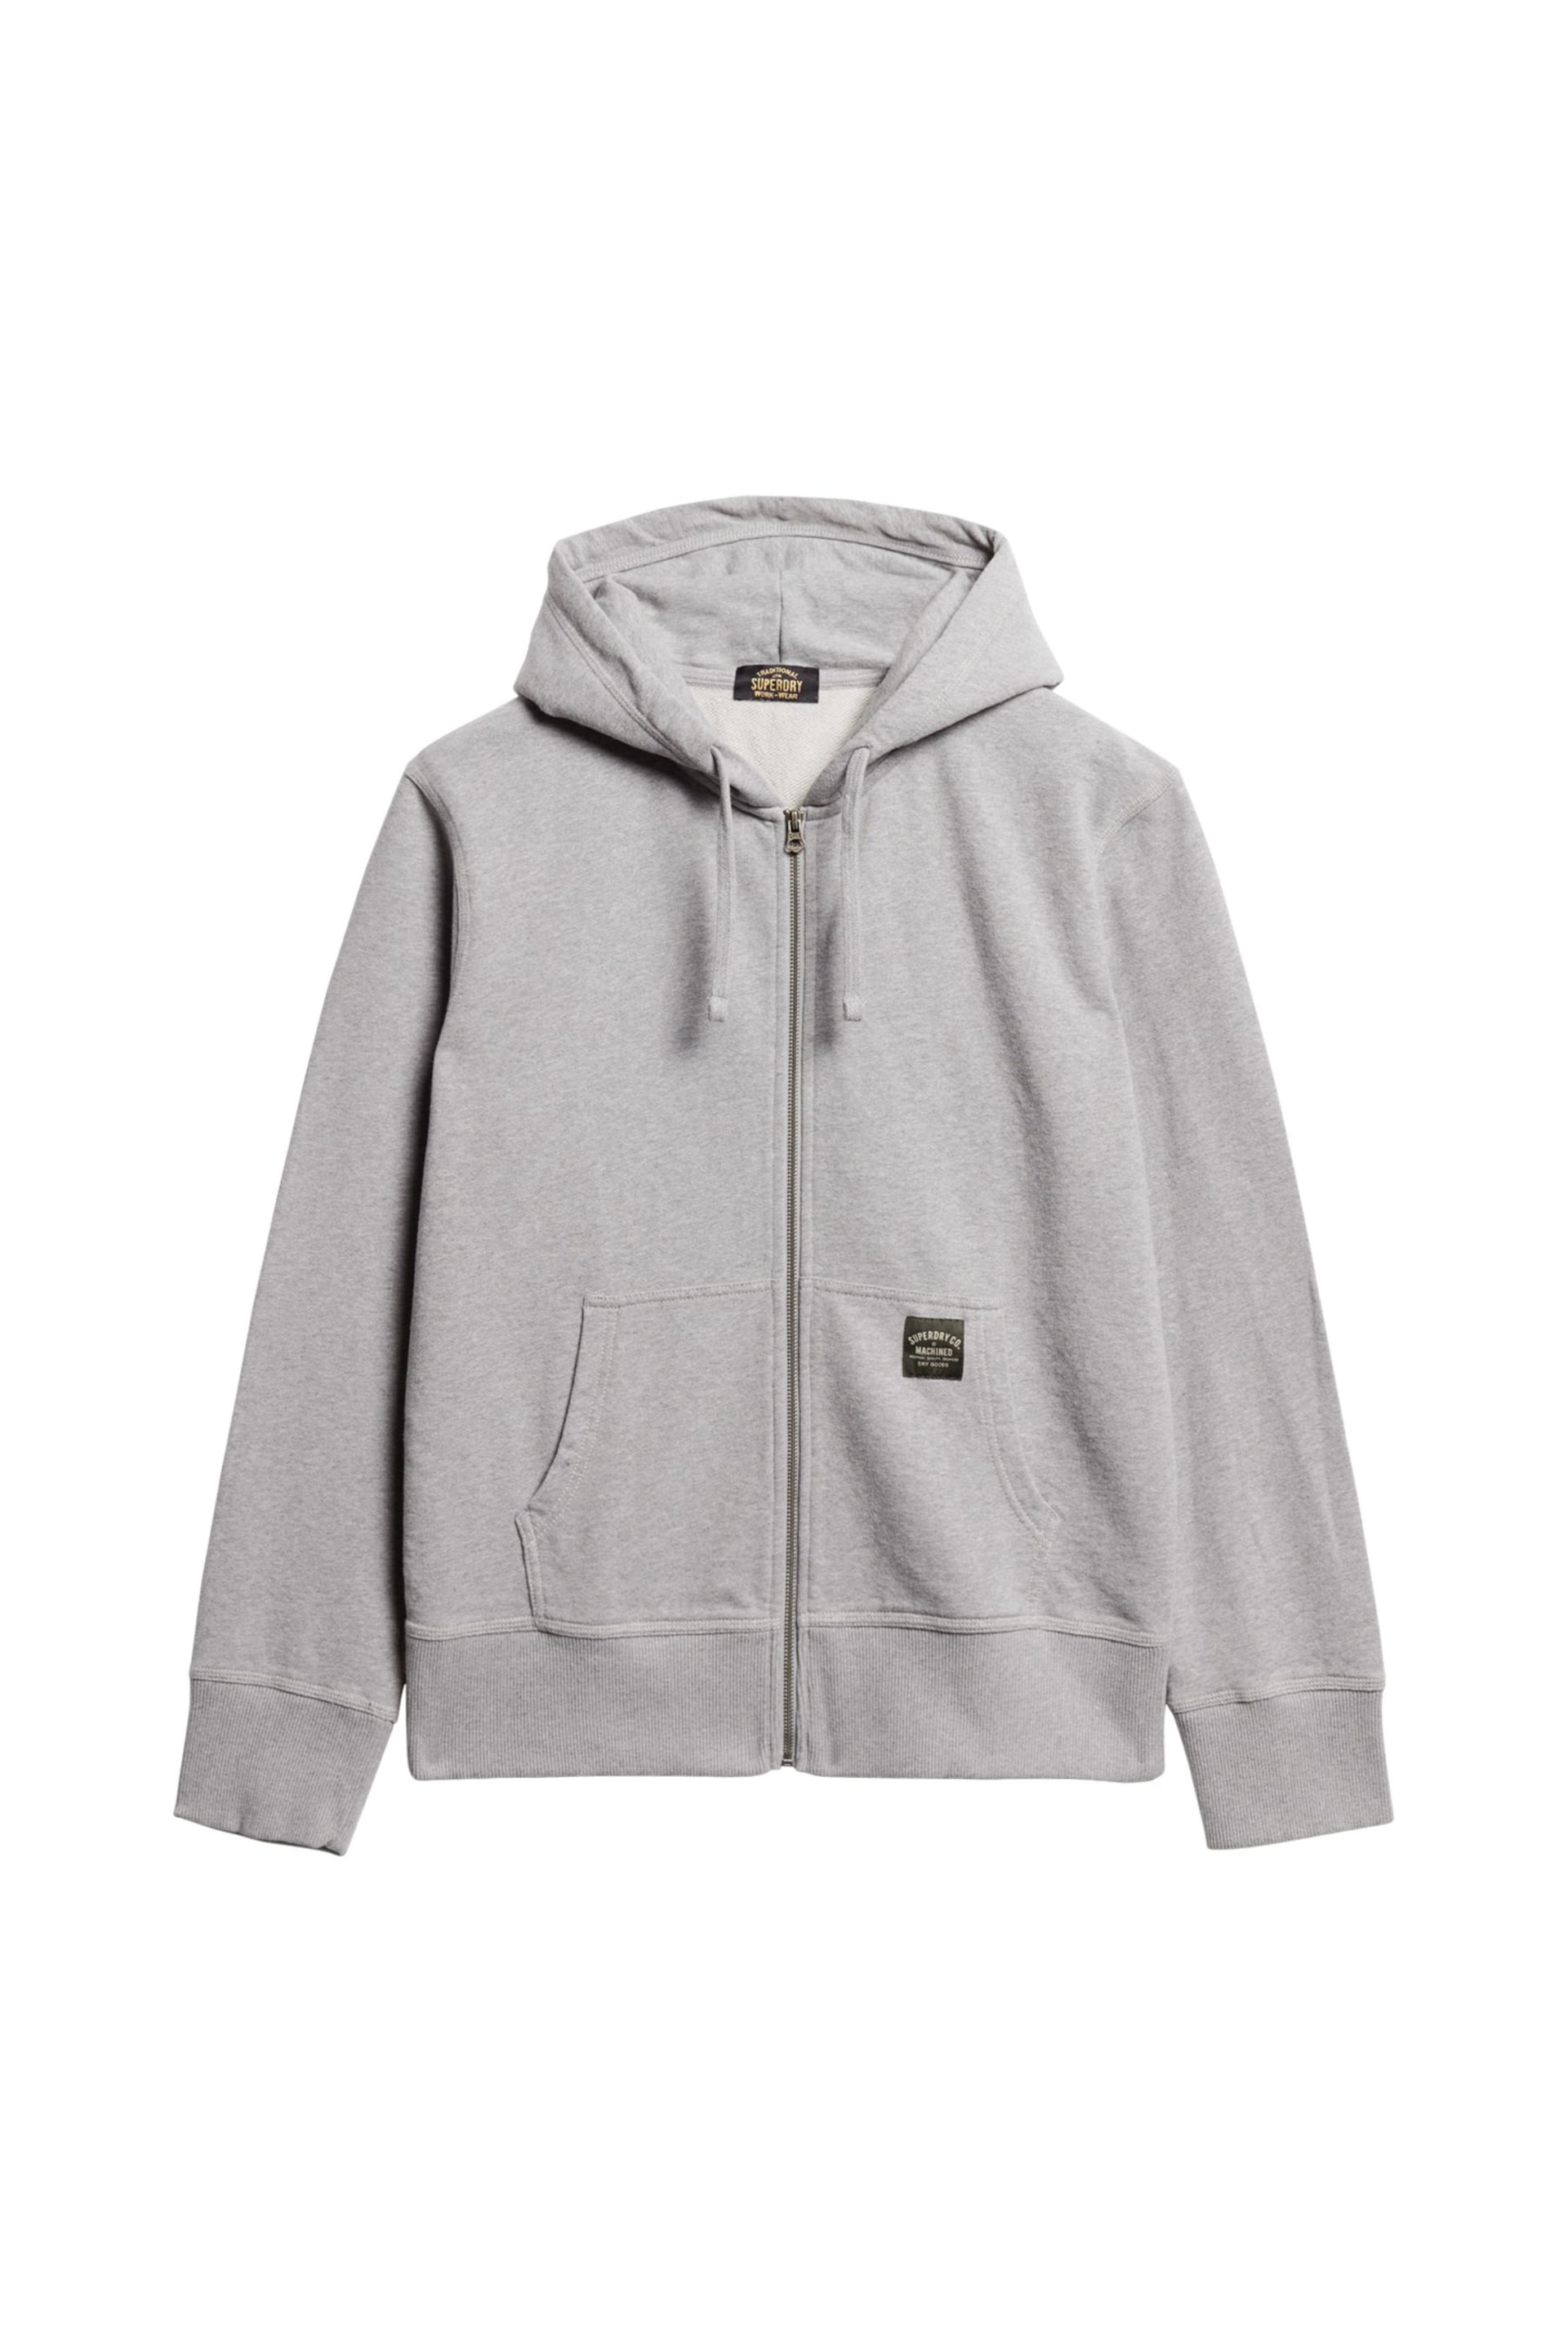 Superdry Grey Contrast Stitch Relax Zip Hoodie - Image 3 of 3